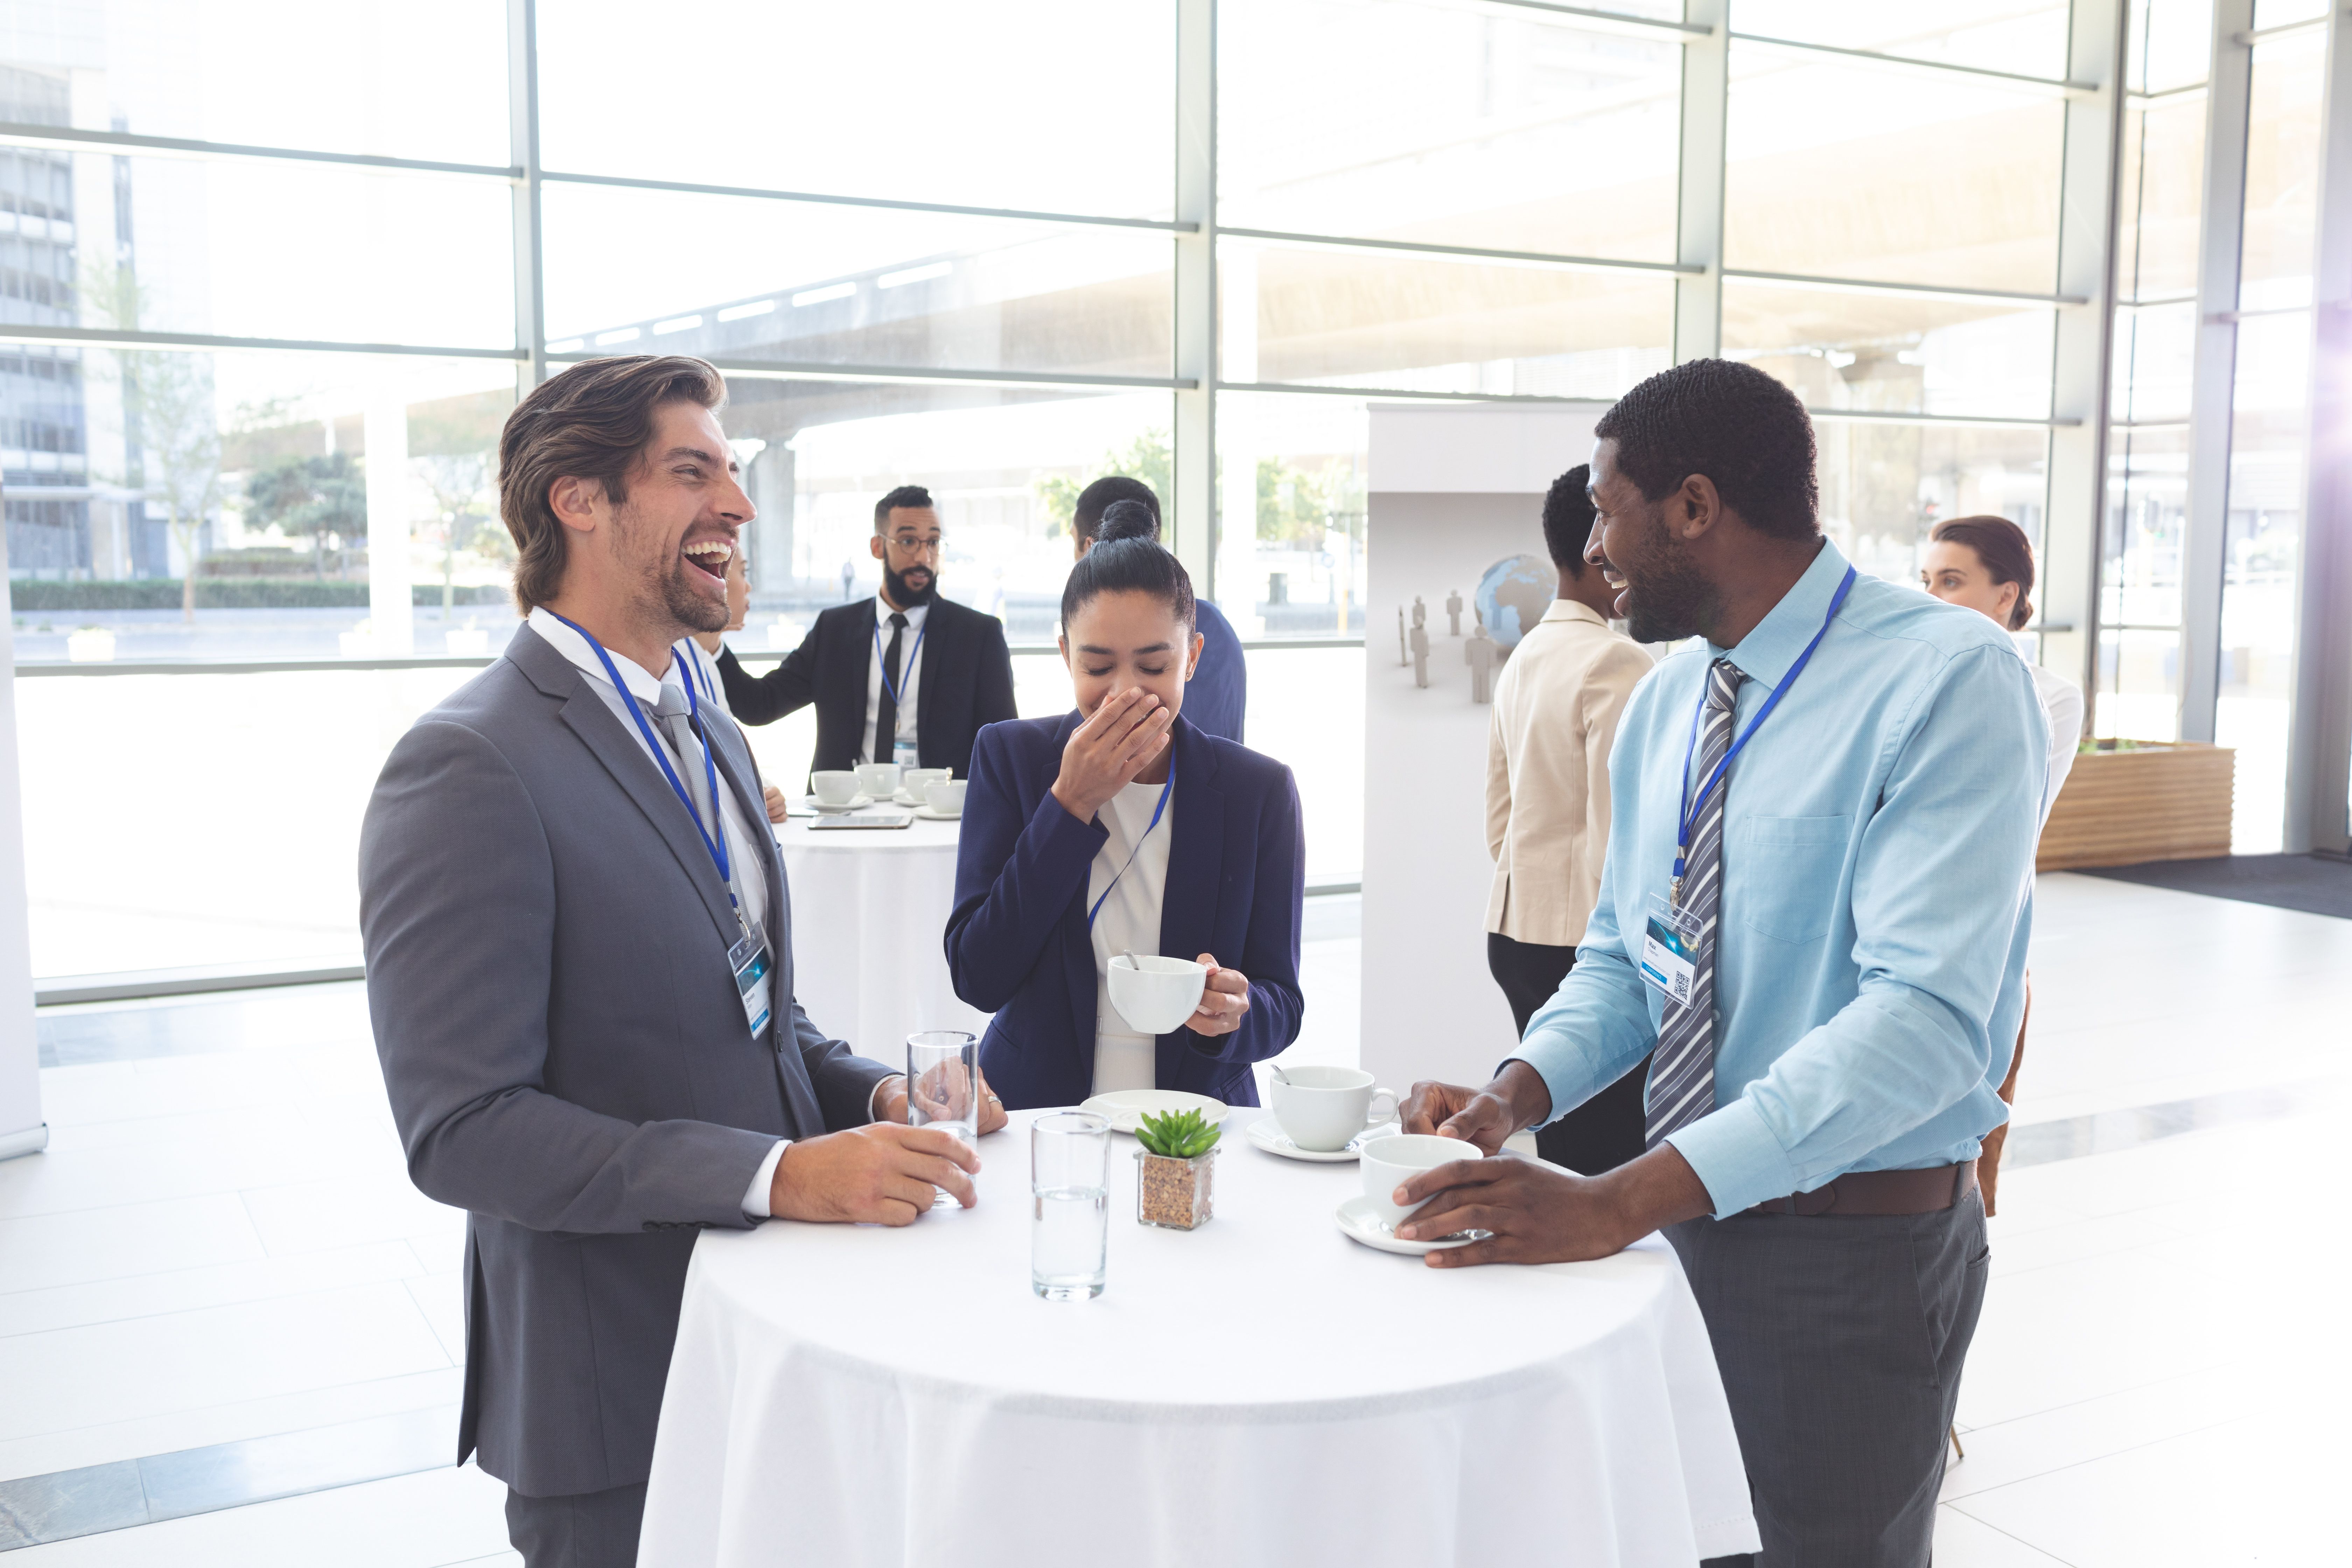 The importance of networking in B2B Sales in the Advertising, Marketing & Media Industry